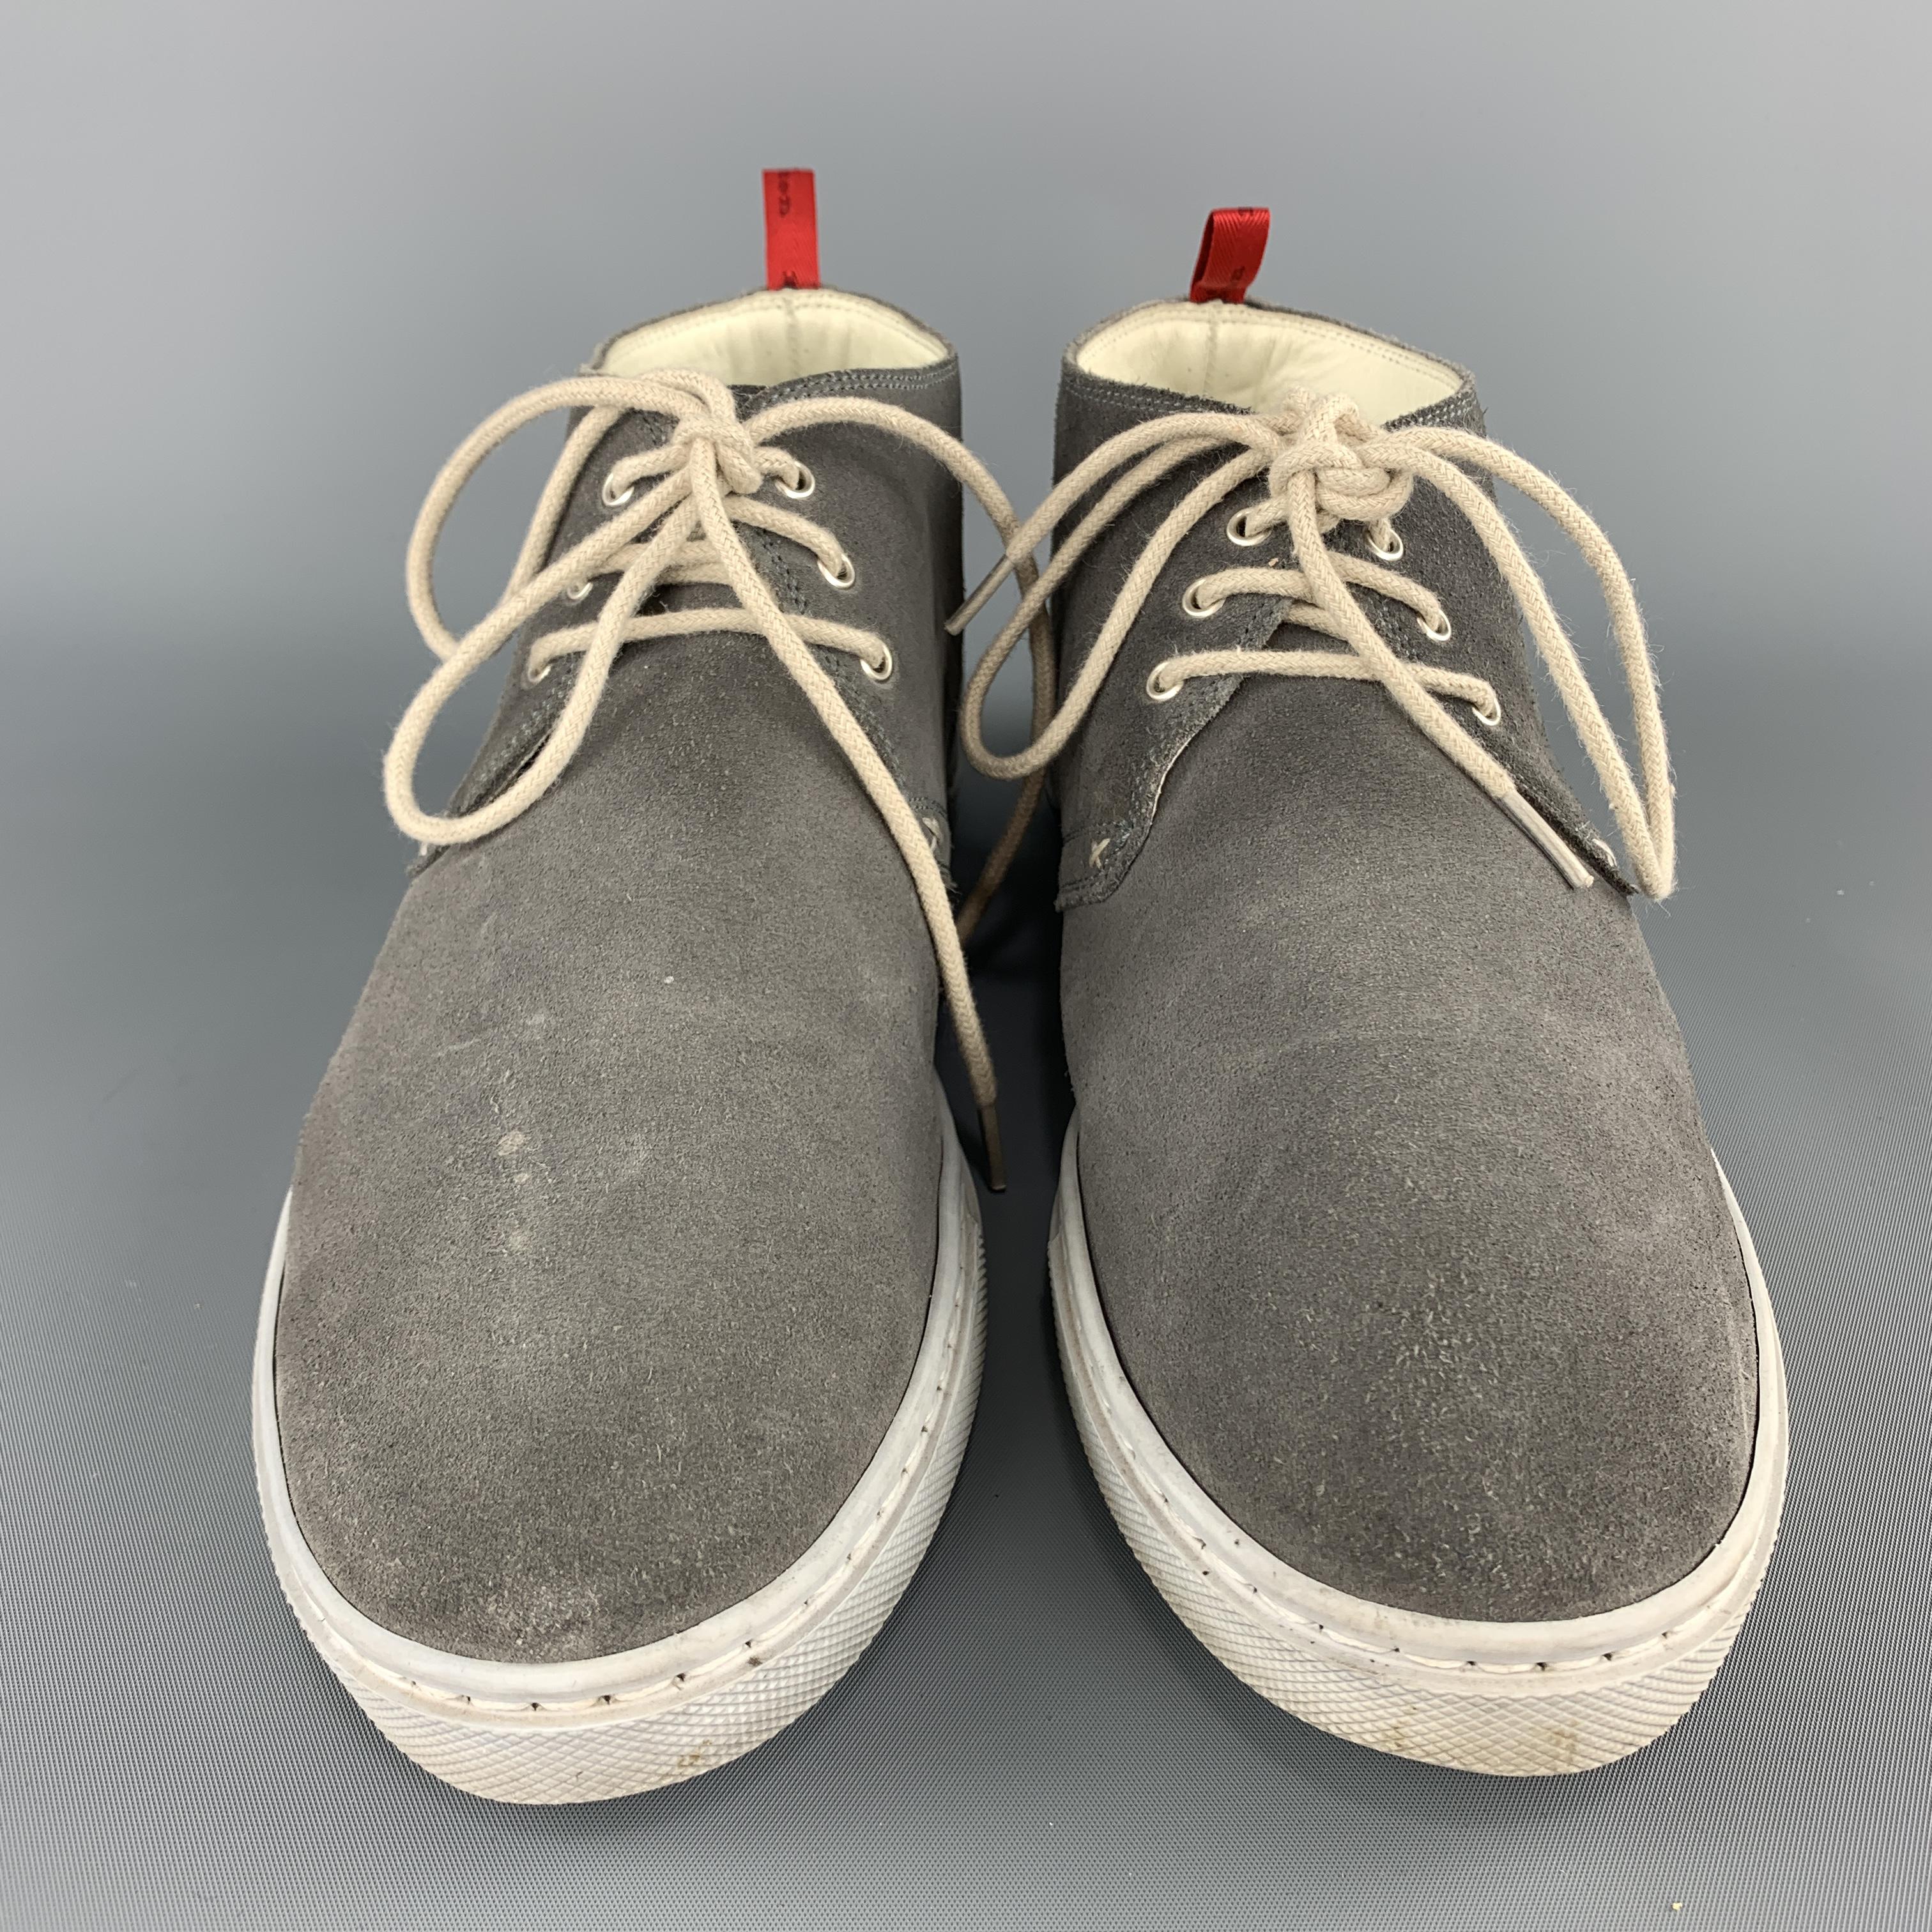 KITON chukka boots sneakers come in dark gray suede with light gray rubber soles. Wear throughout. 

Good Pre-Owned Condition.
Marked: UK 7

Outsole: 11 x 3.75 in.